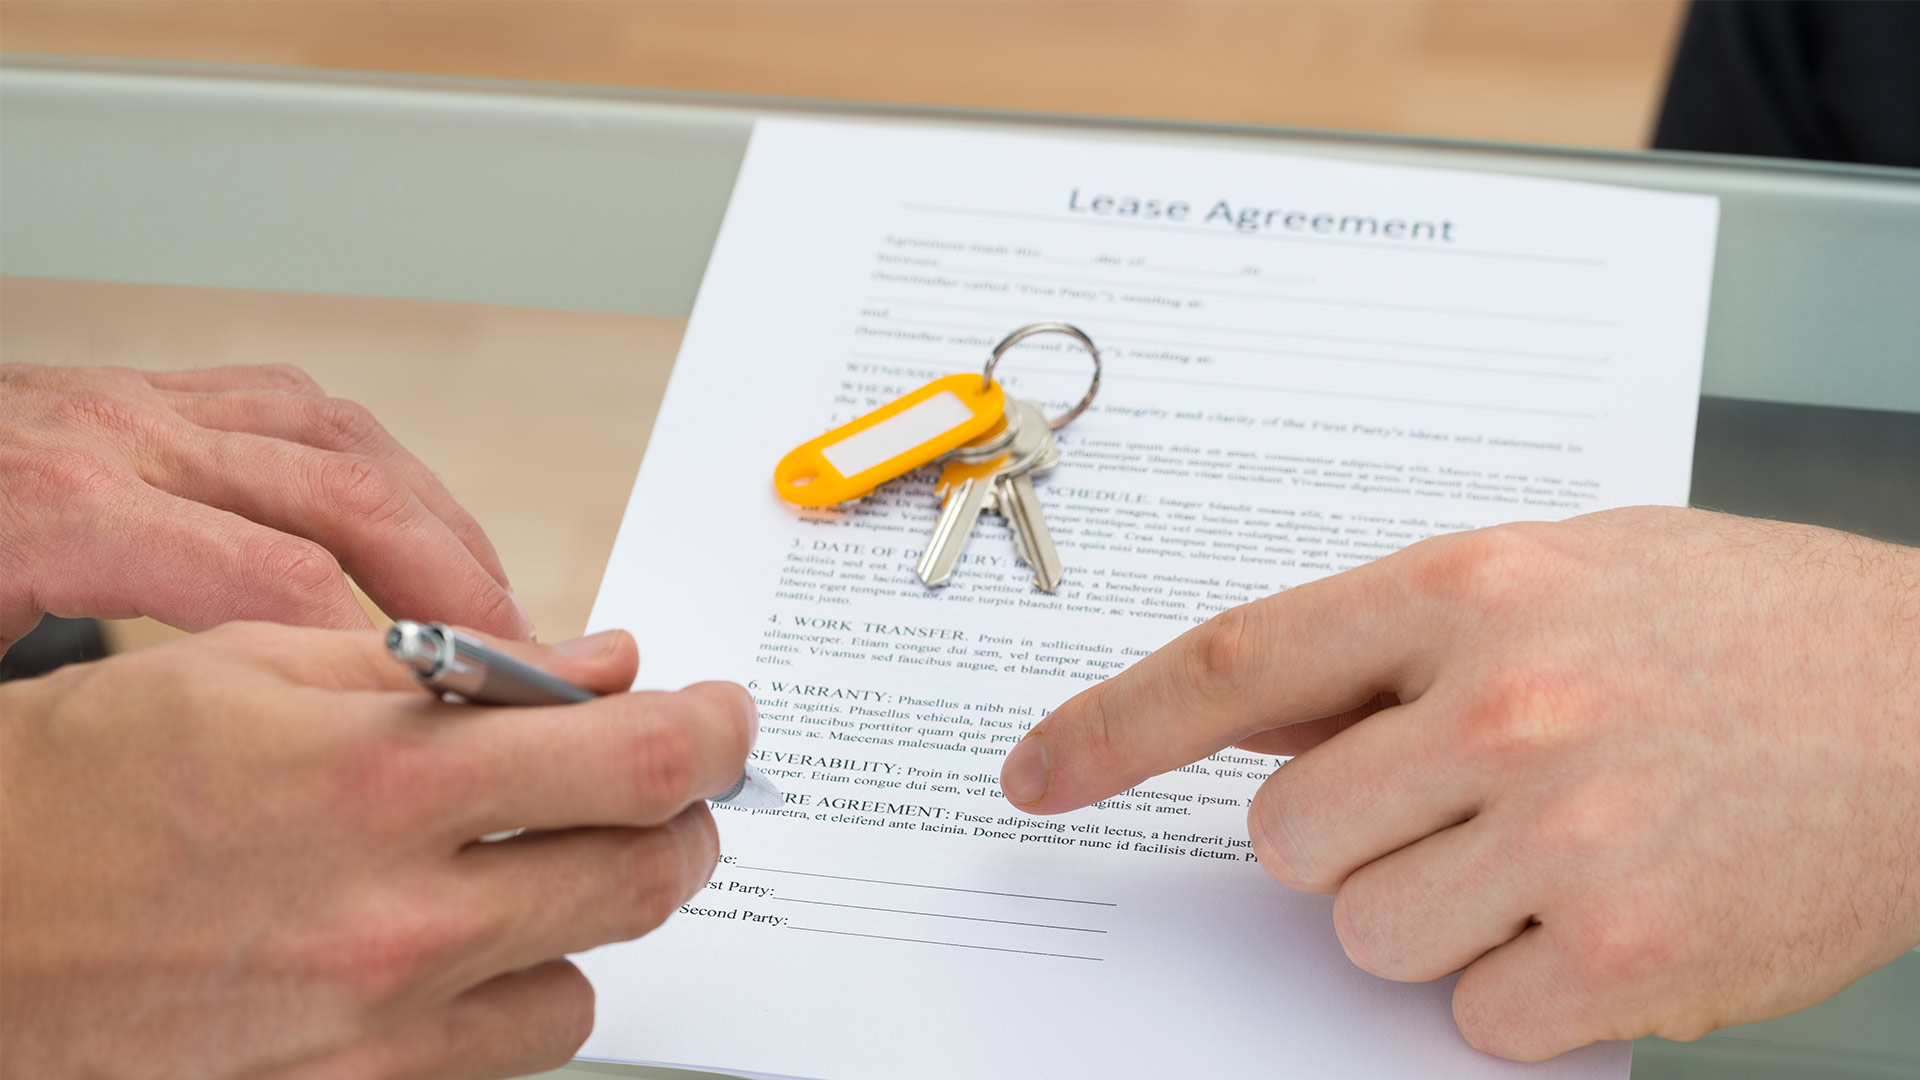 Cosigner Agreement Property Management Forms: Contracts Agreements